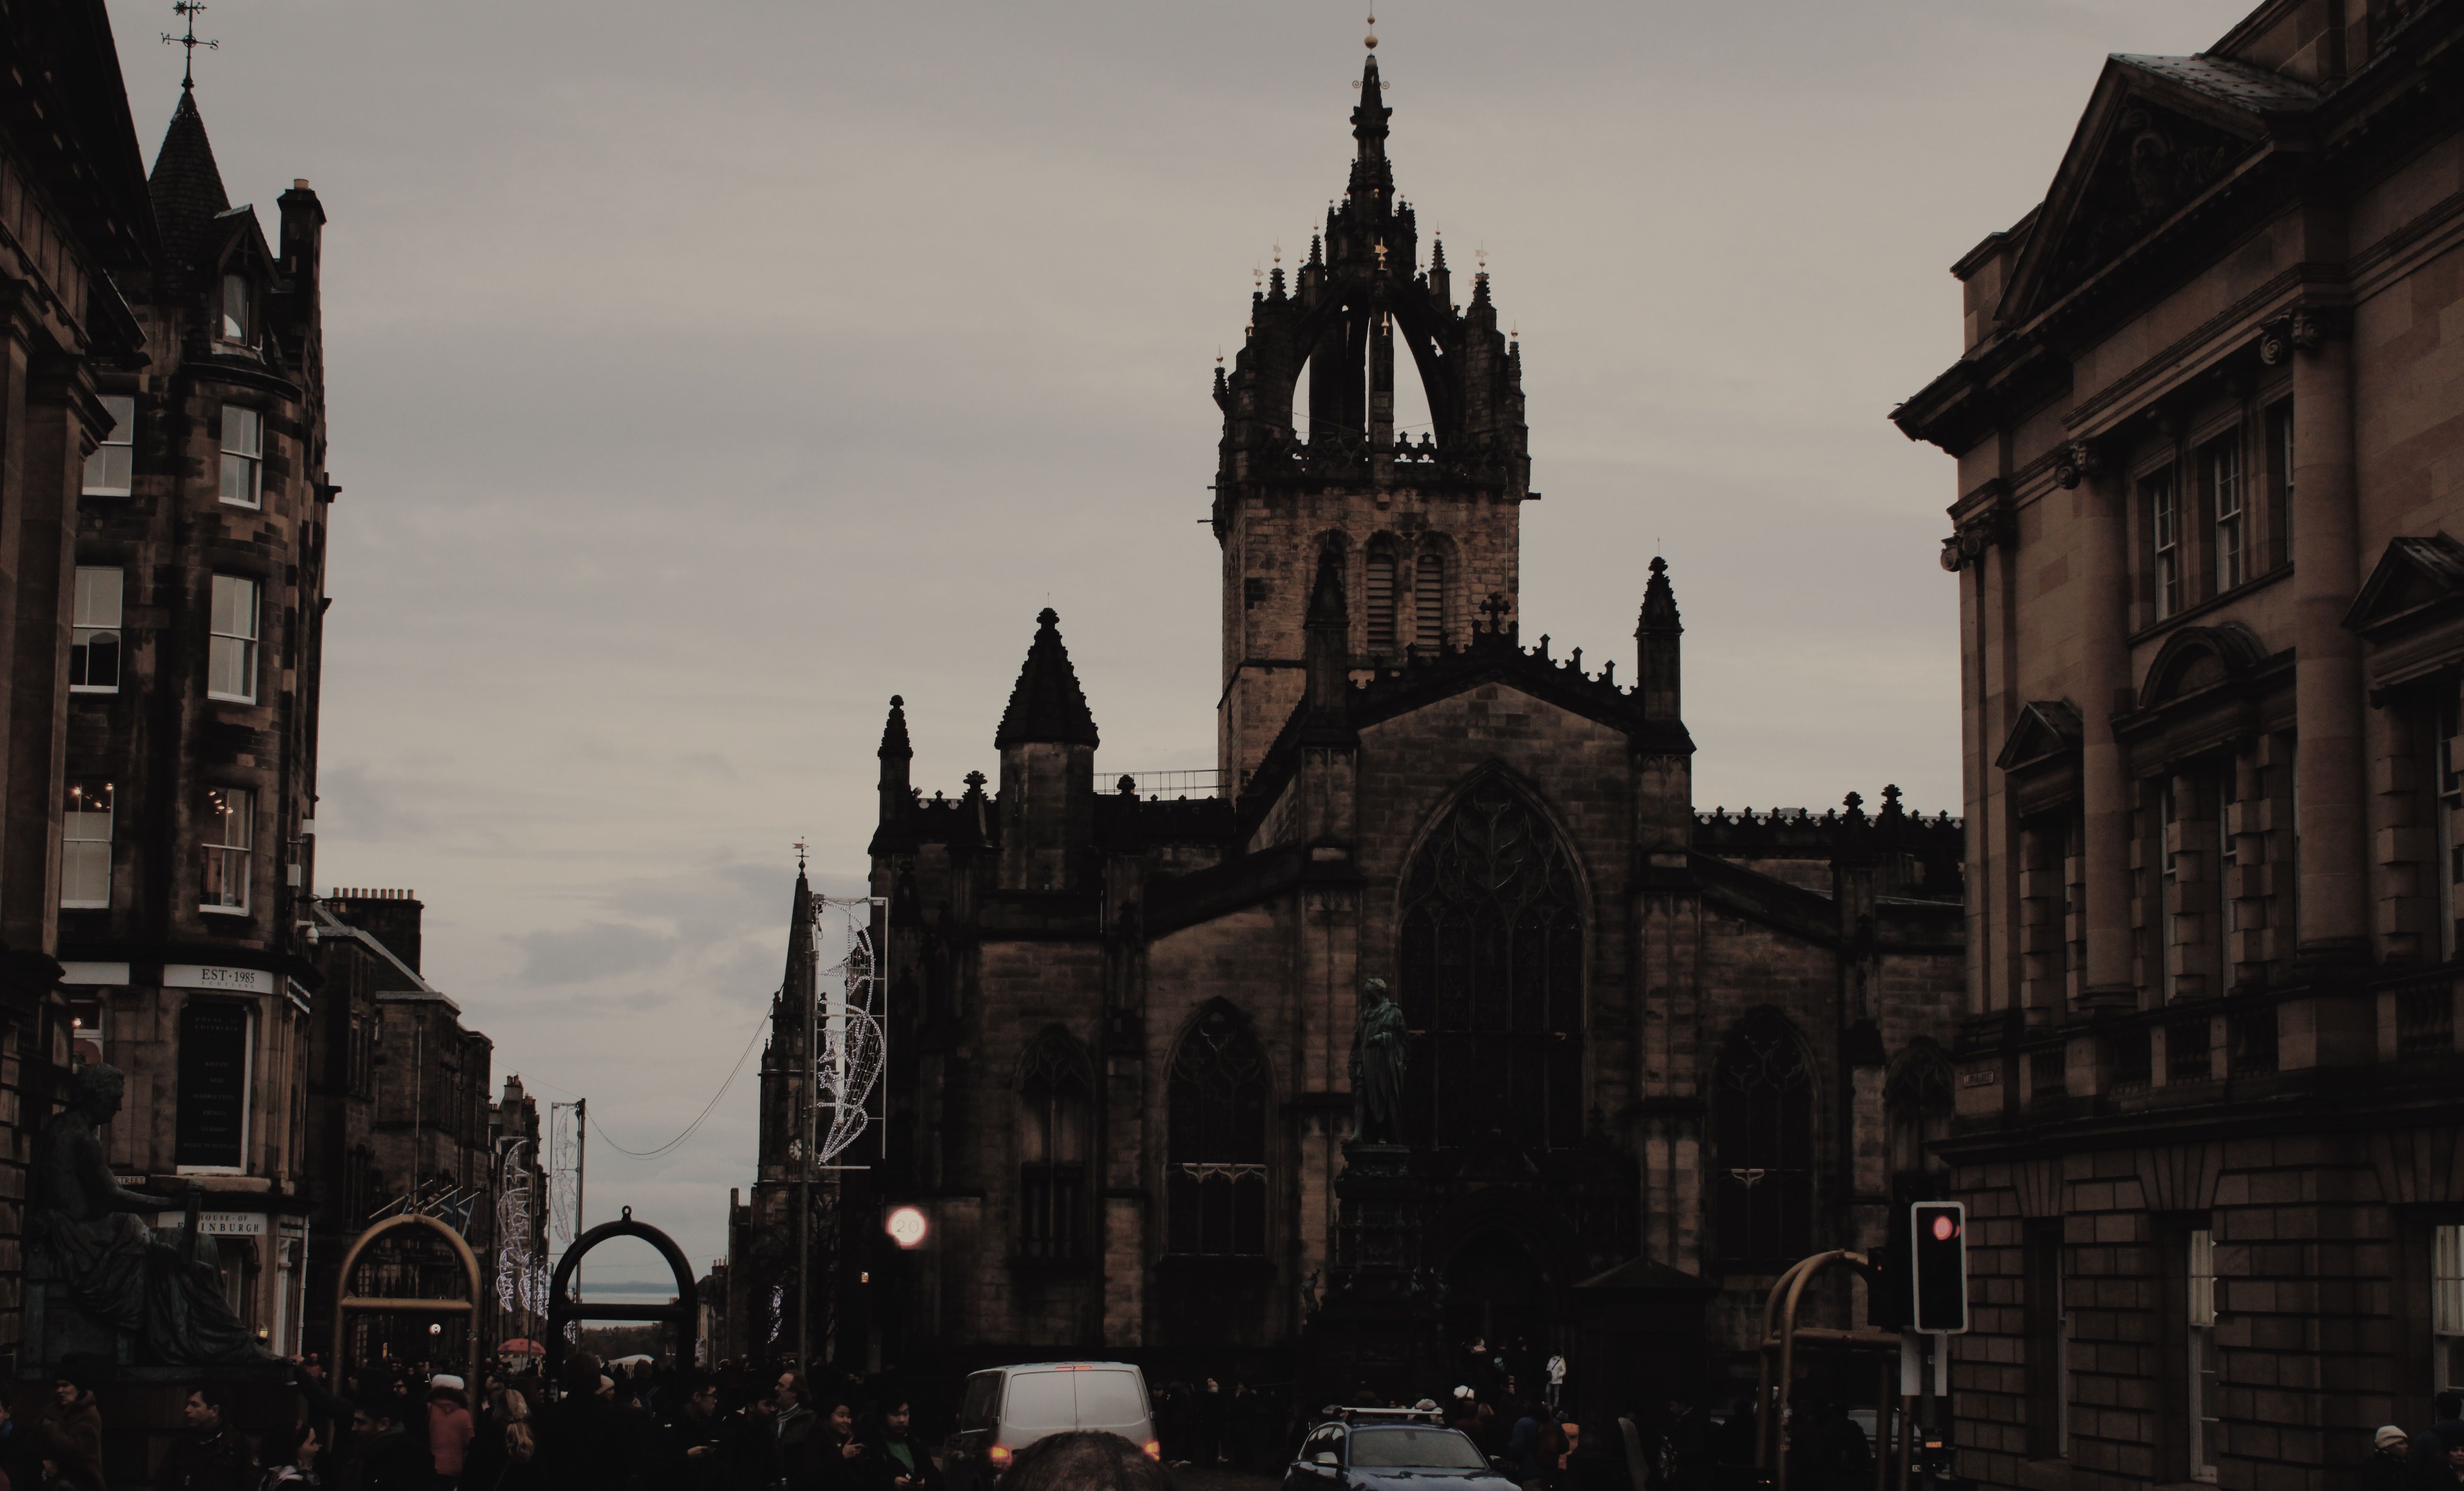 A large cathedral is seen towering over the city of Edinburgh. - Dark academia